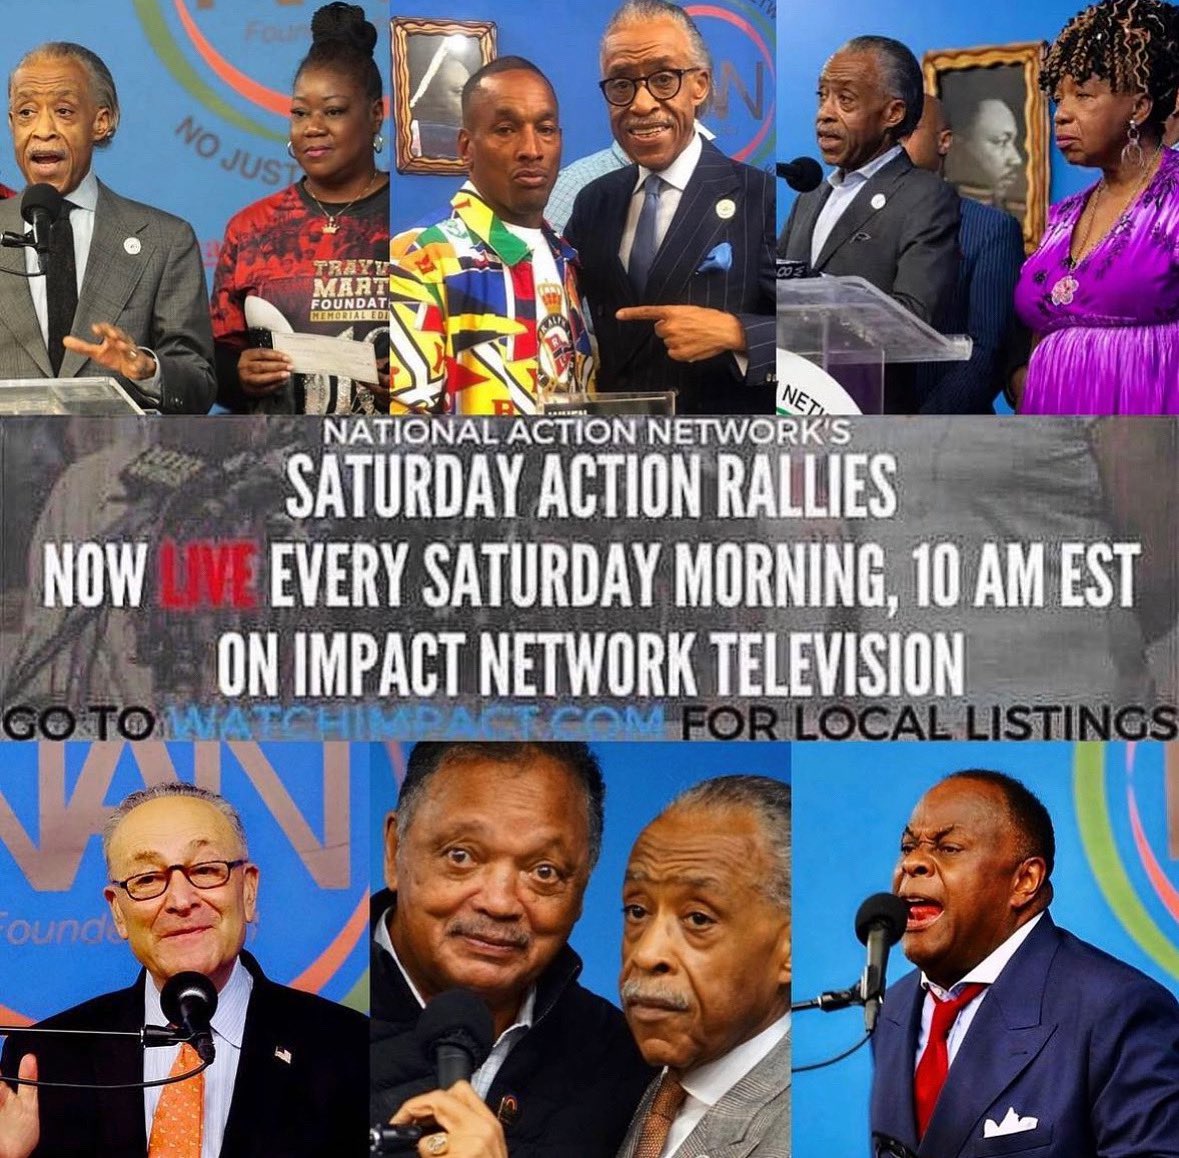 🗣TODAY, @NationalAction (NAN) will broadcast live across the country. Tune in to the #NANSaturdayActionRally at 9am ET via @1190amWLIB(radio)📻 & at 10am ET on @ImpactTVNetwork📺. You can also tune in online via NAN’s Facebook or YouTube. #getintotheaction